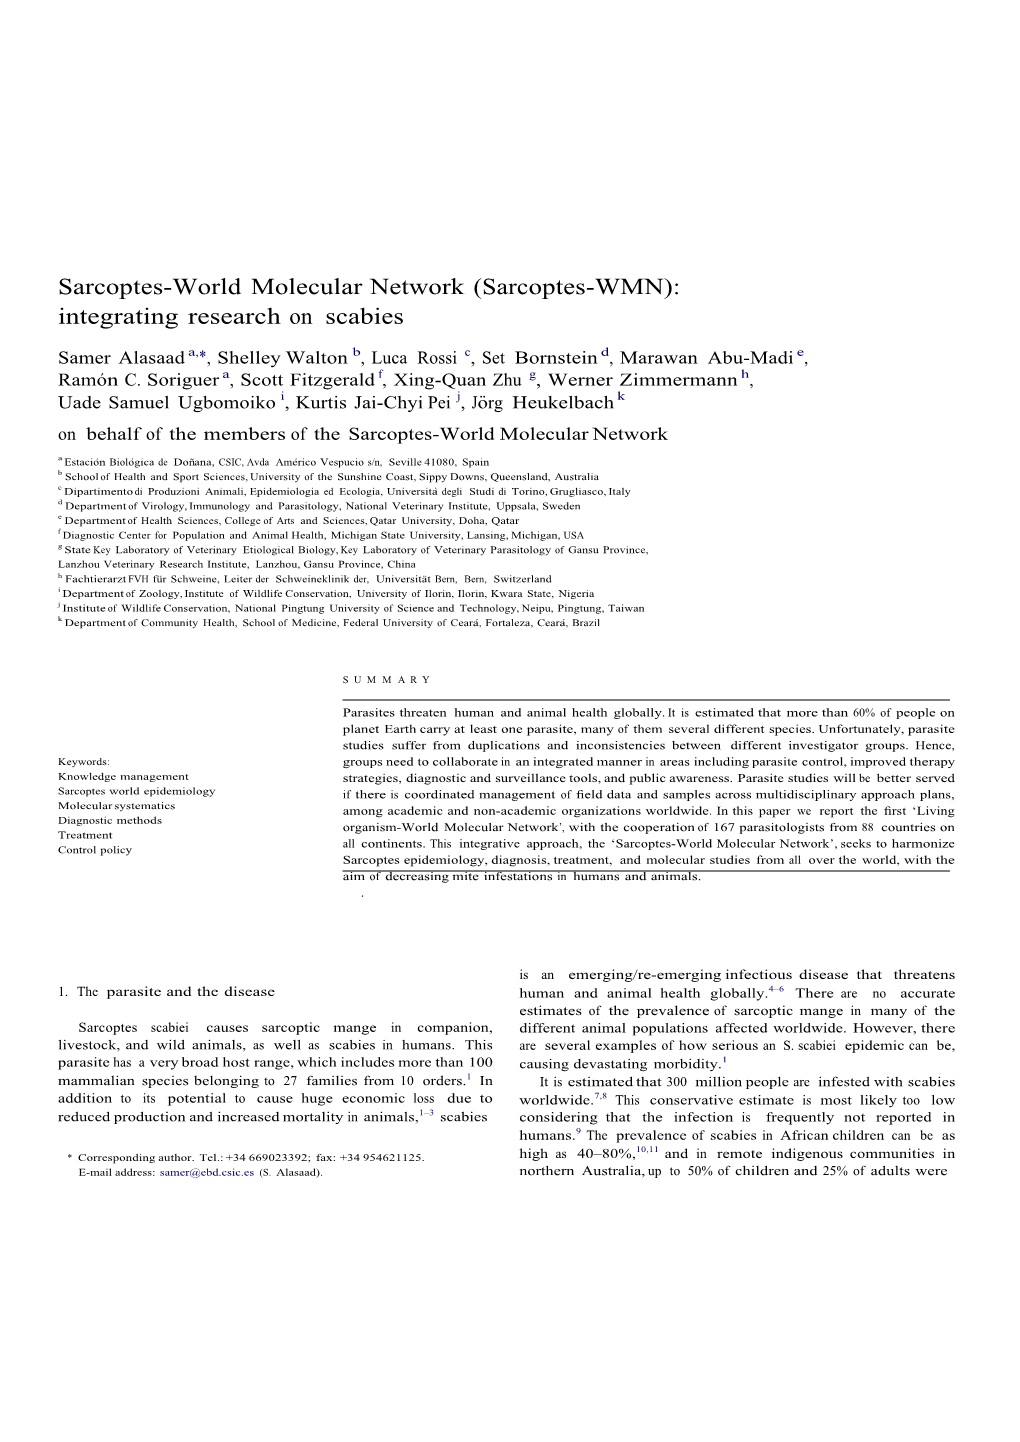 Sarcoptes-World Molecular Network (Sarcoptes-WMN): Integrating Research on Scabies